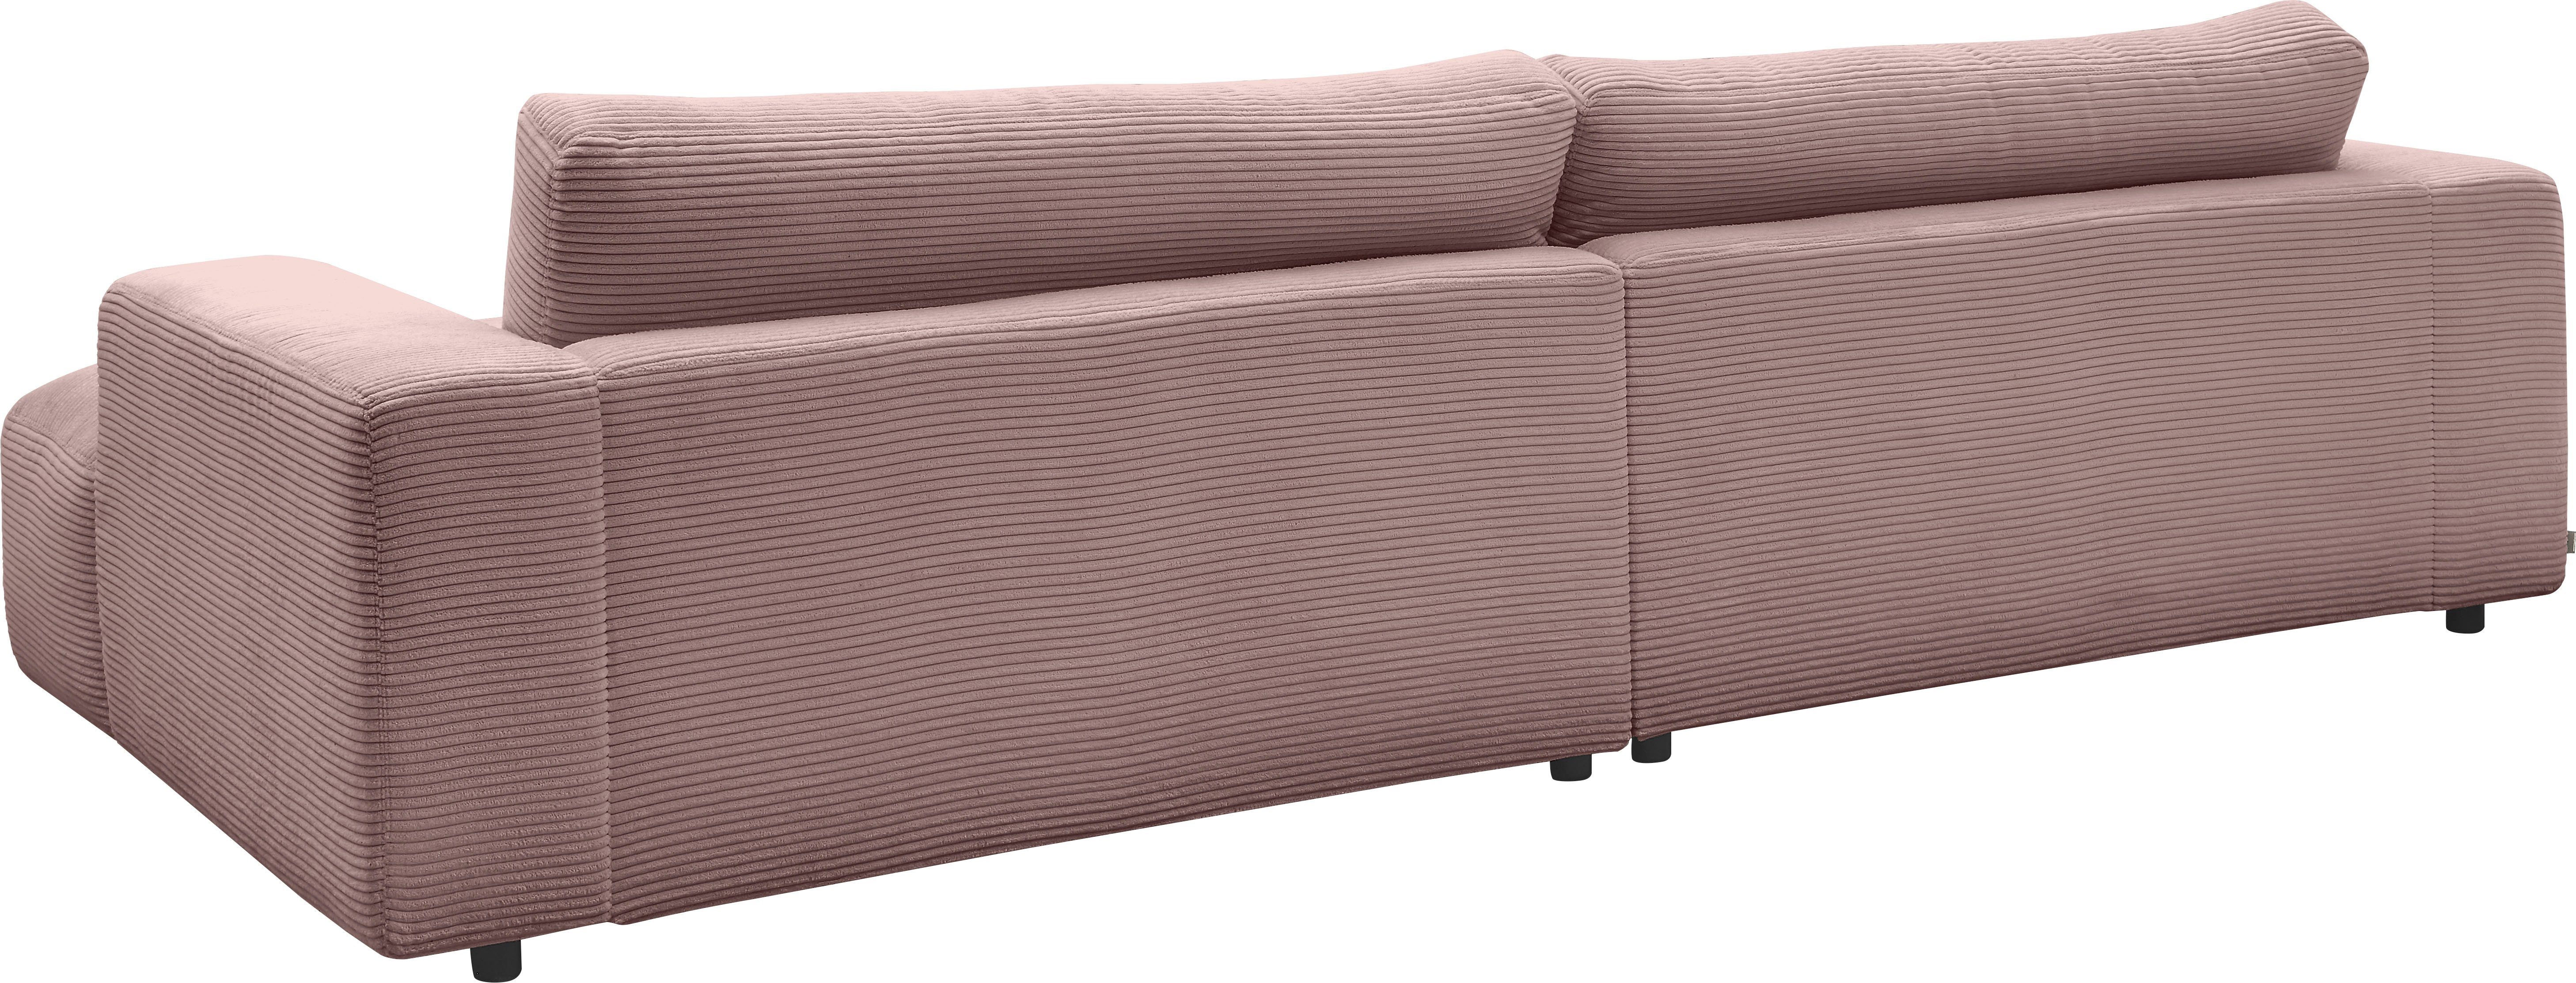 Breite branded by 292 Lucia, M GALLERY Cord-Bezug, rosa Loungesofa Musterring cm